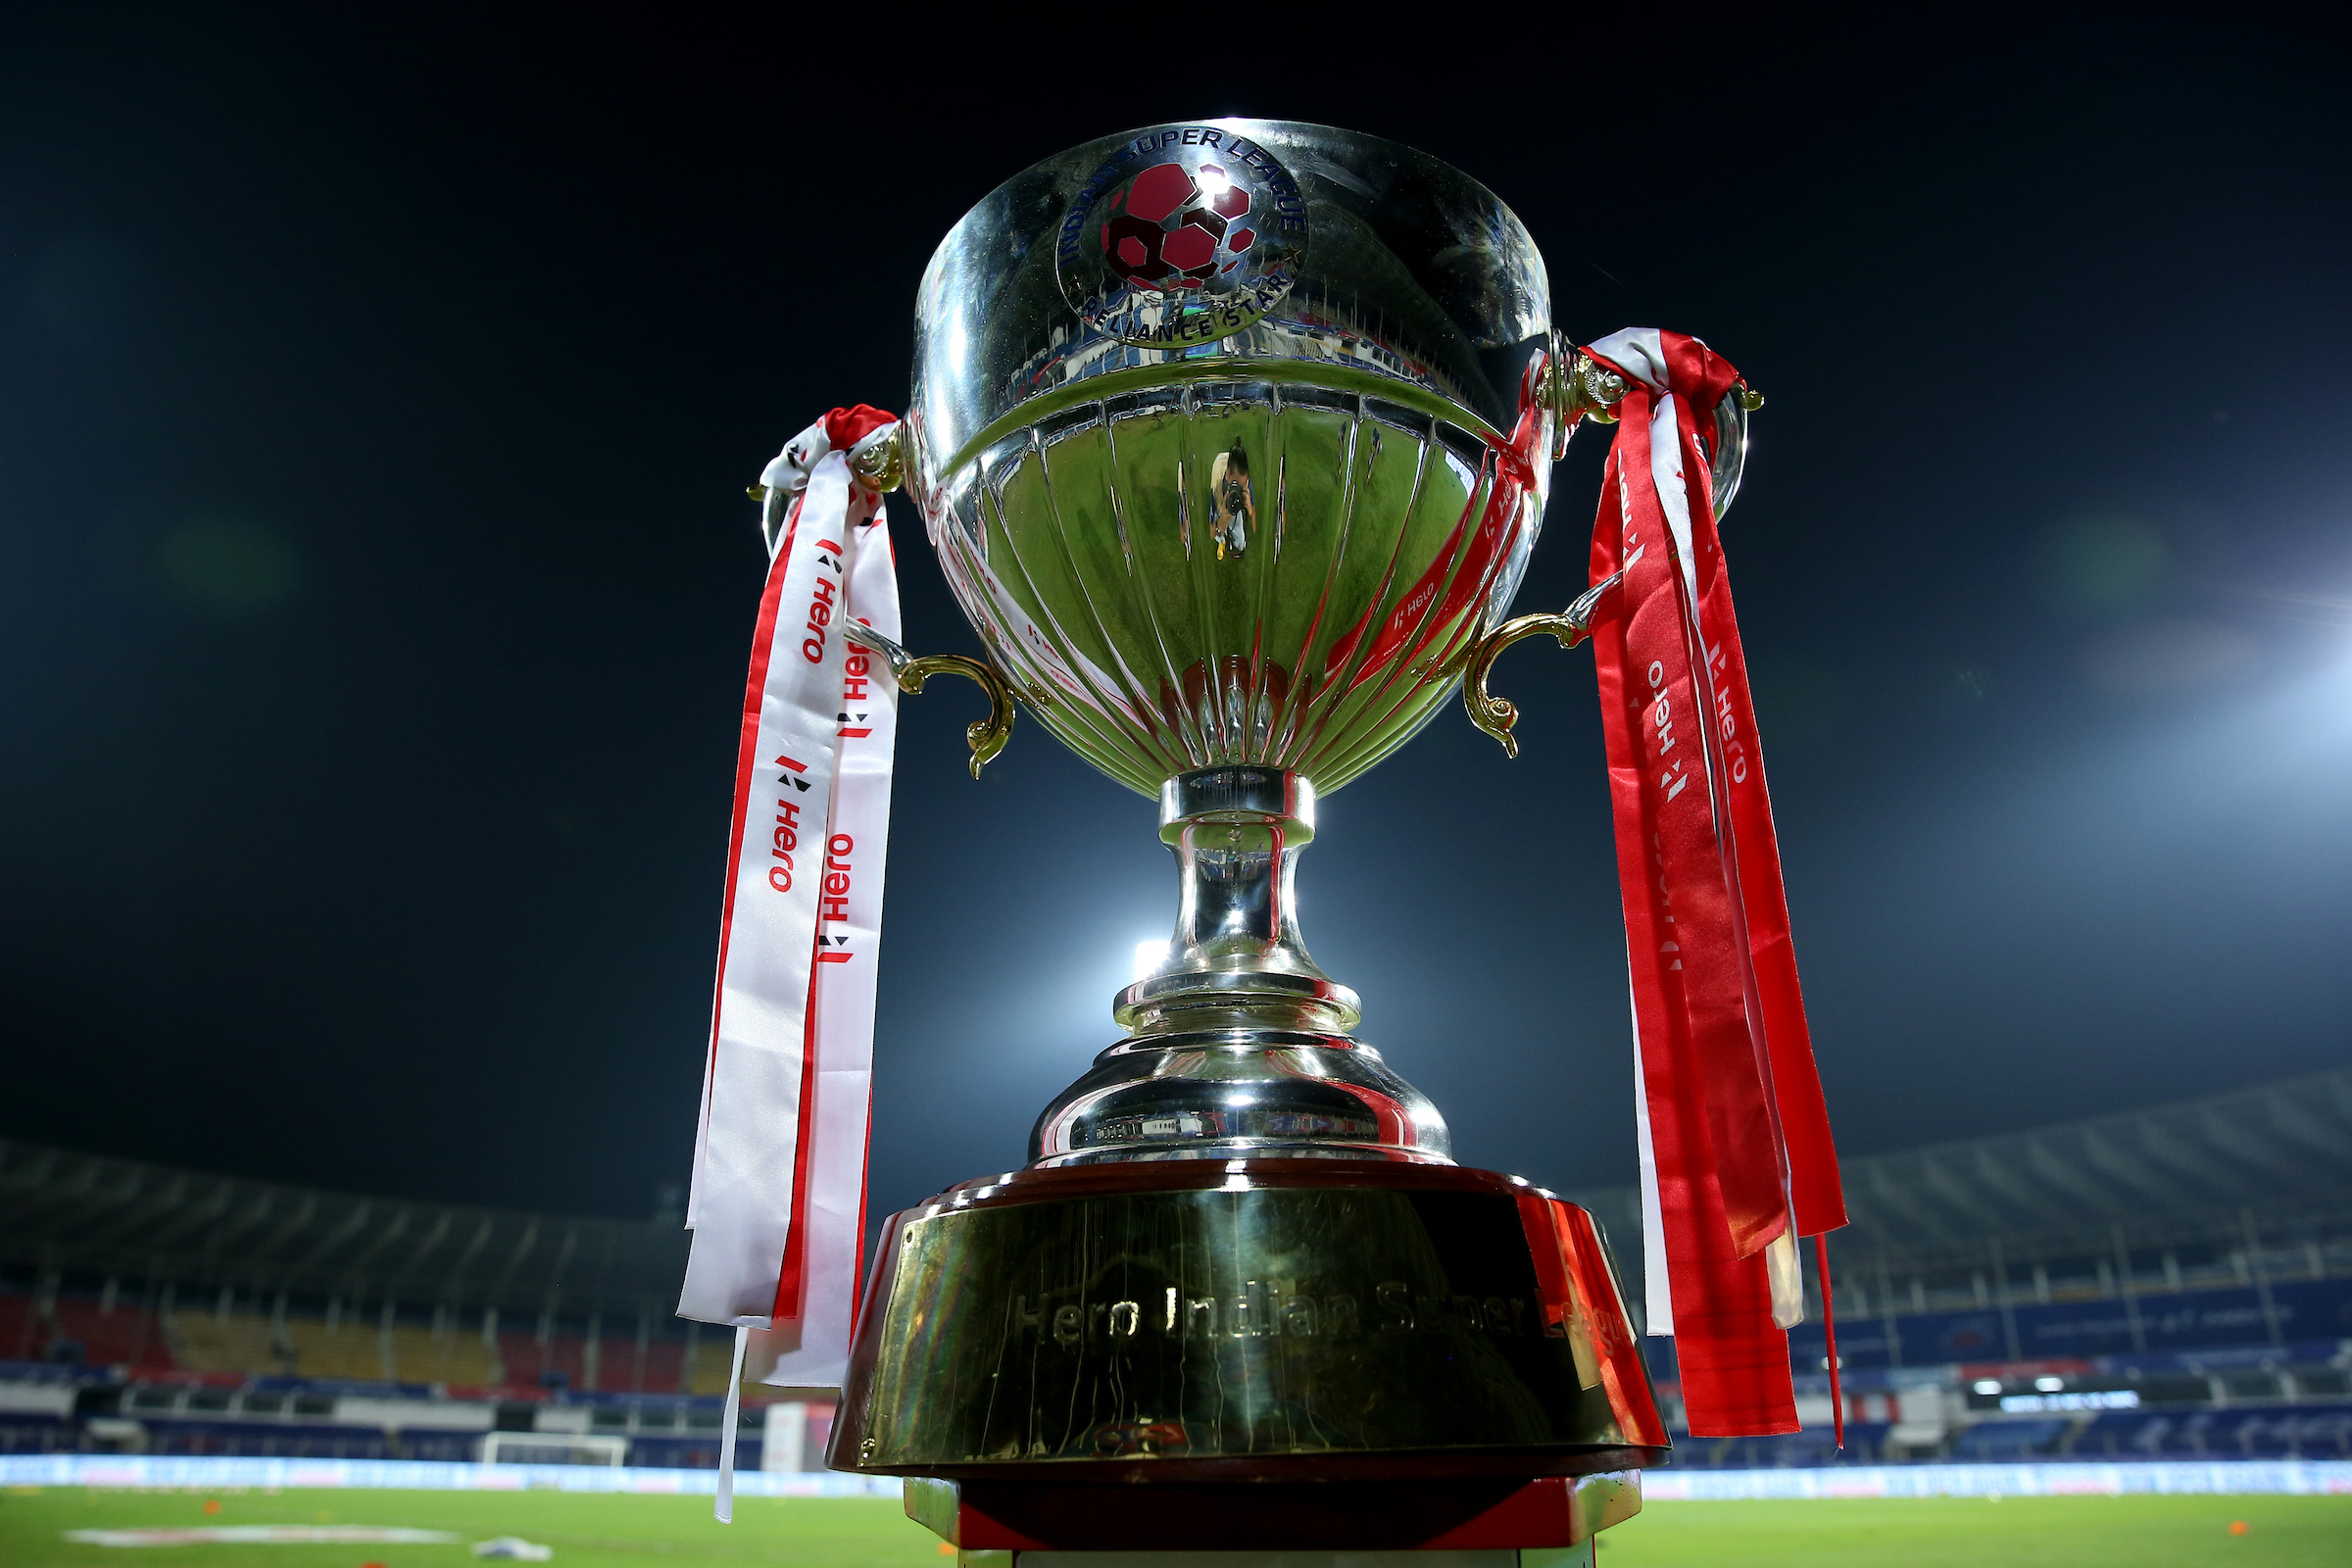 Reports | Promotion & relegation between ISL and I-League a possibility from next season